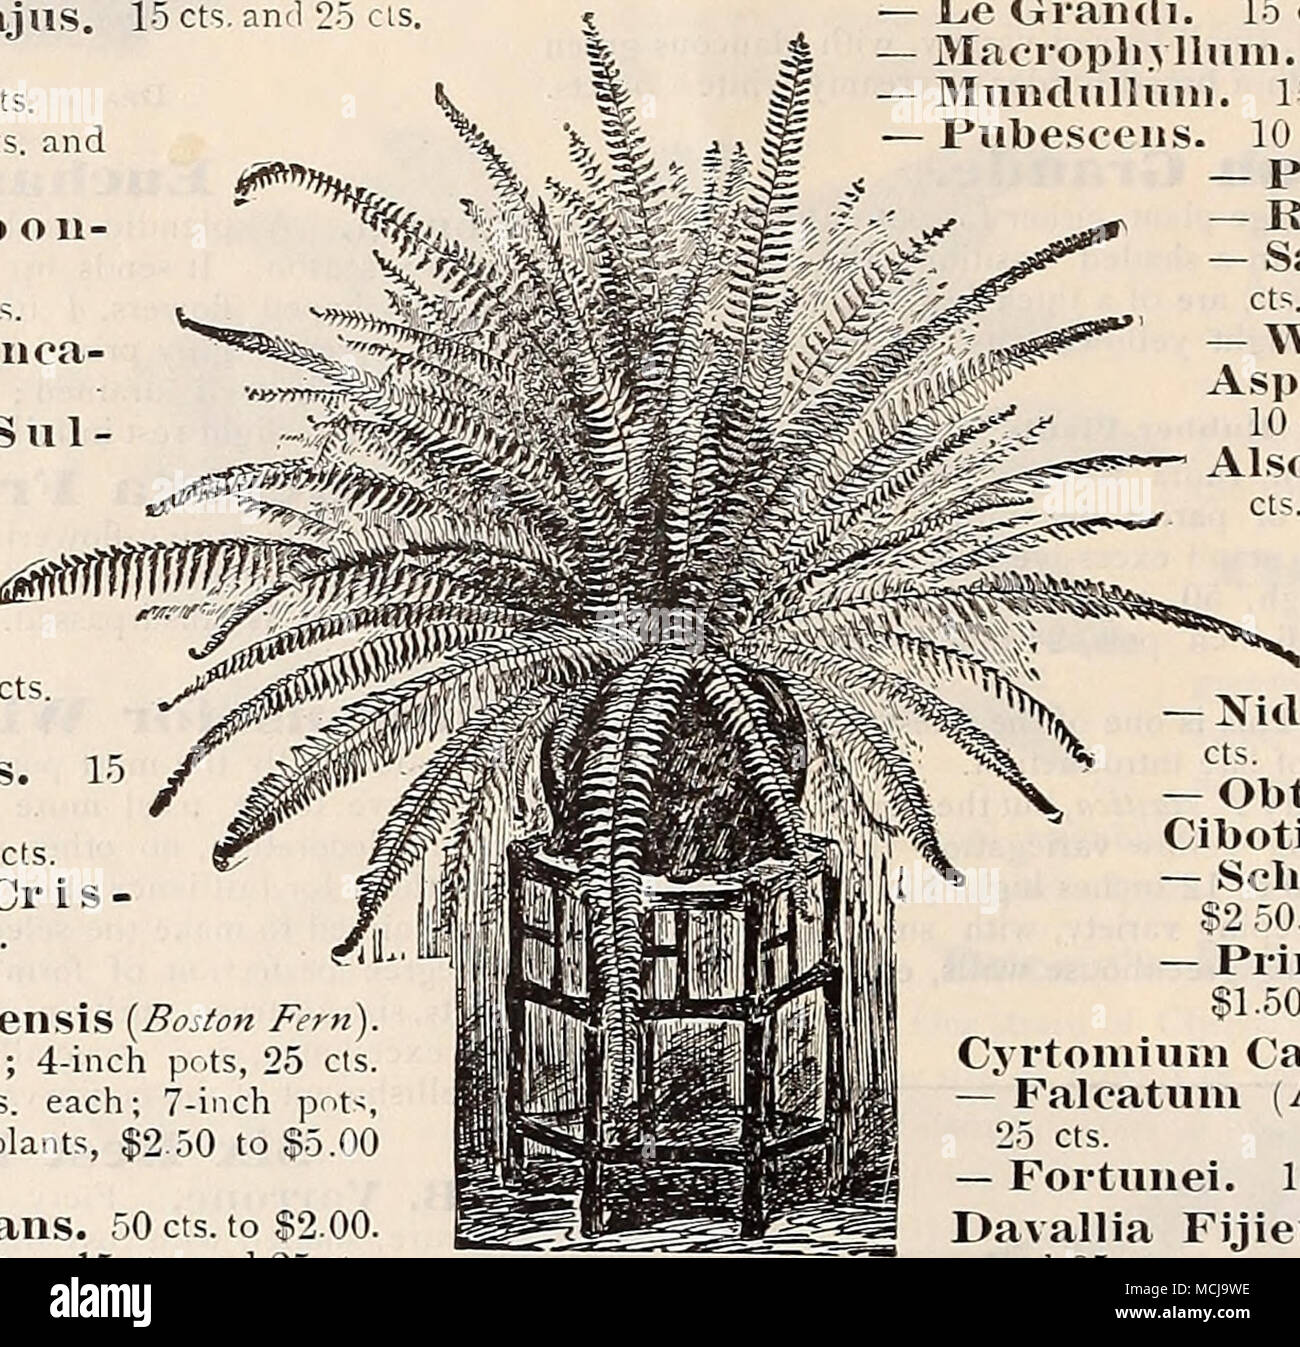 . and $1.00. 15 cts. Boston Sword Fern. tunei. 15 cts. lia Fijiensis Plumosa. and 25 cts. 15 cts. Collections of Ferns. 26 varieties of Adiantums or Maiden-Hairs, one of each, for $4.00. 12 varieties, assorted, suitable for filling- Fern Dishes, for $1.00. 92 varieties, the entire collection, for §10. 15 cts. Pteris Arolluta. 10 cts. — Sieboldii. 10 cts. — Treinula. 10 cts. Sniitbiana. 15 cts. — Wimsetti. 10 cts. Sitalobium Cicutarium. 25 c;s. Stock Photo